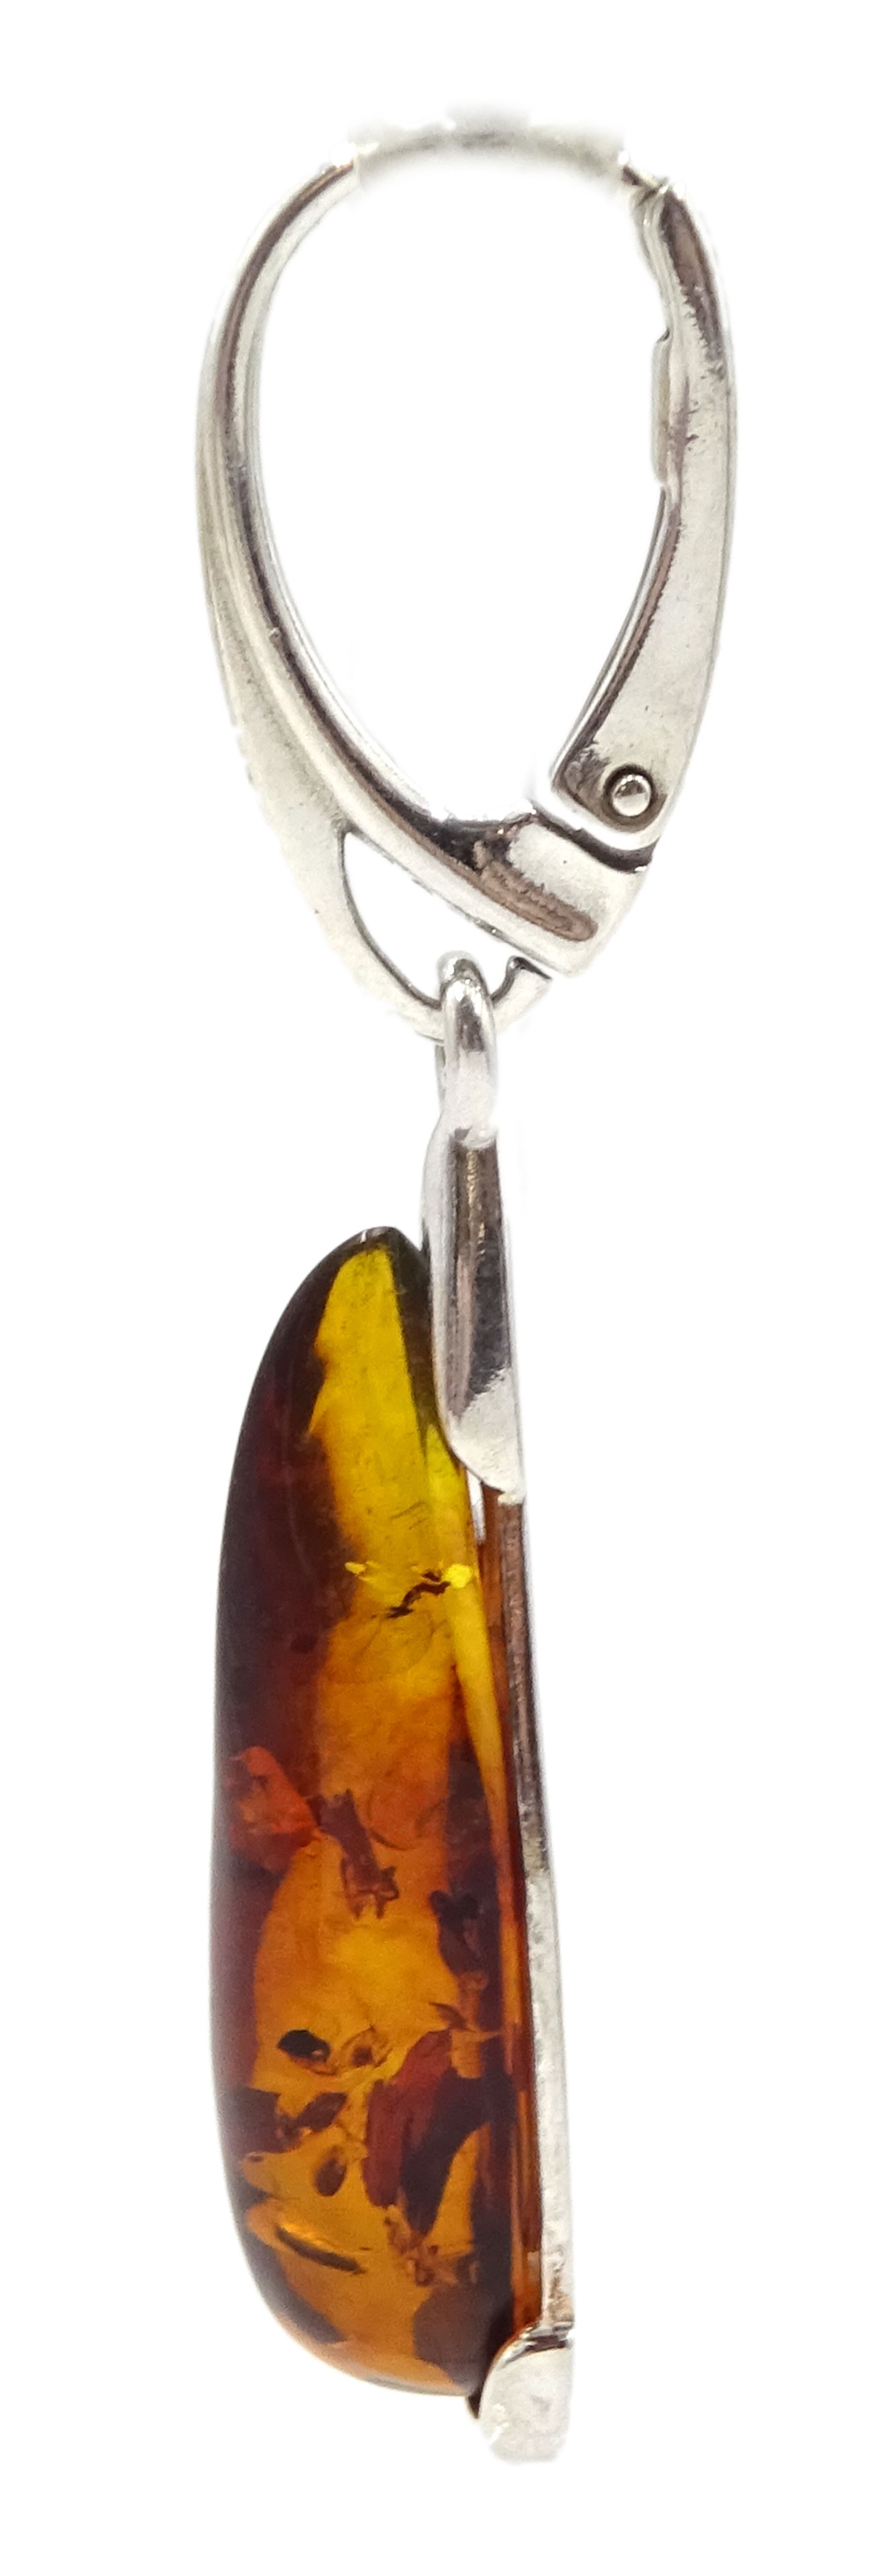 Pair of silver Baltic amber pendant earrings - Image 2 of 2